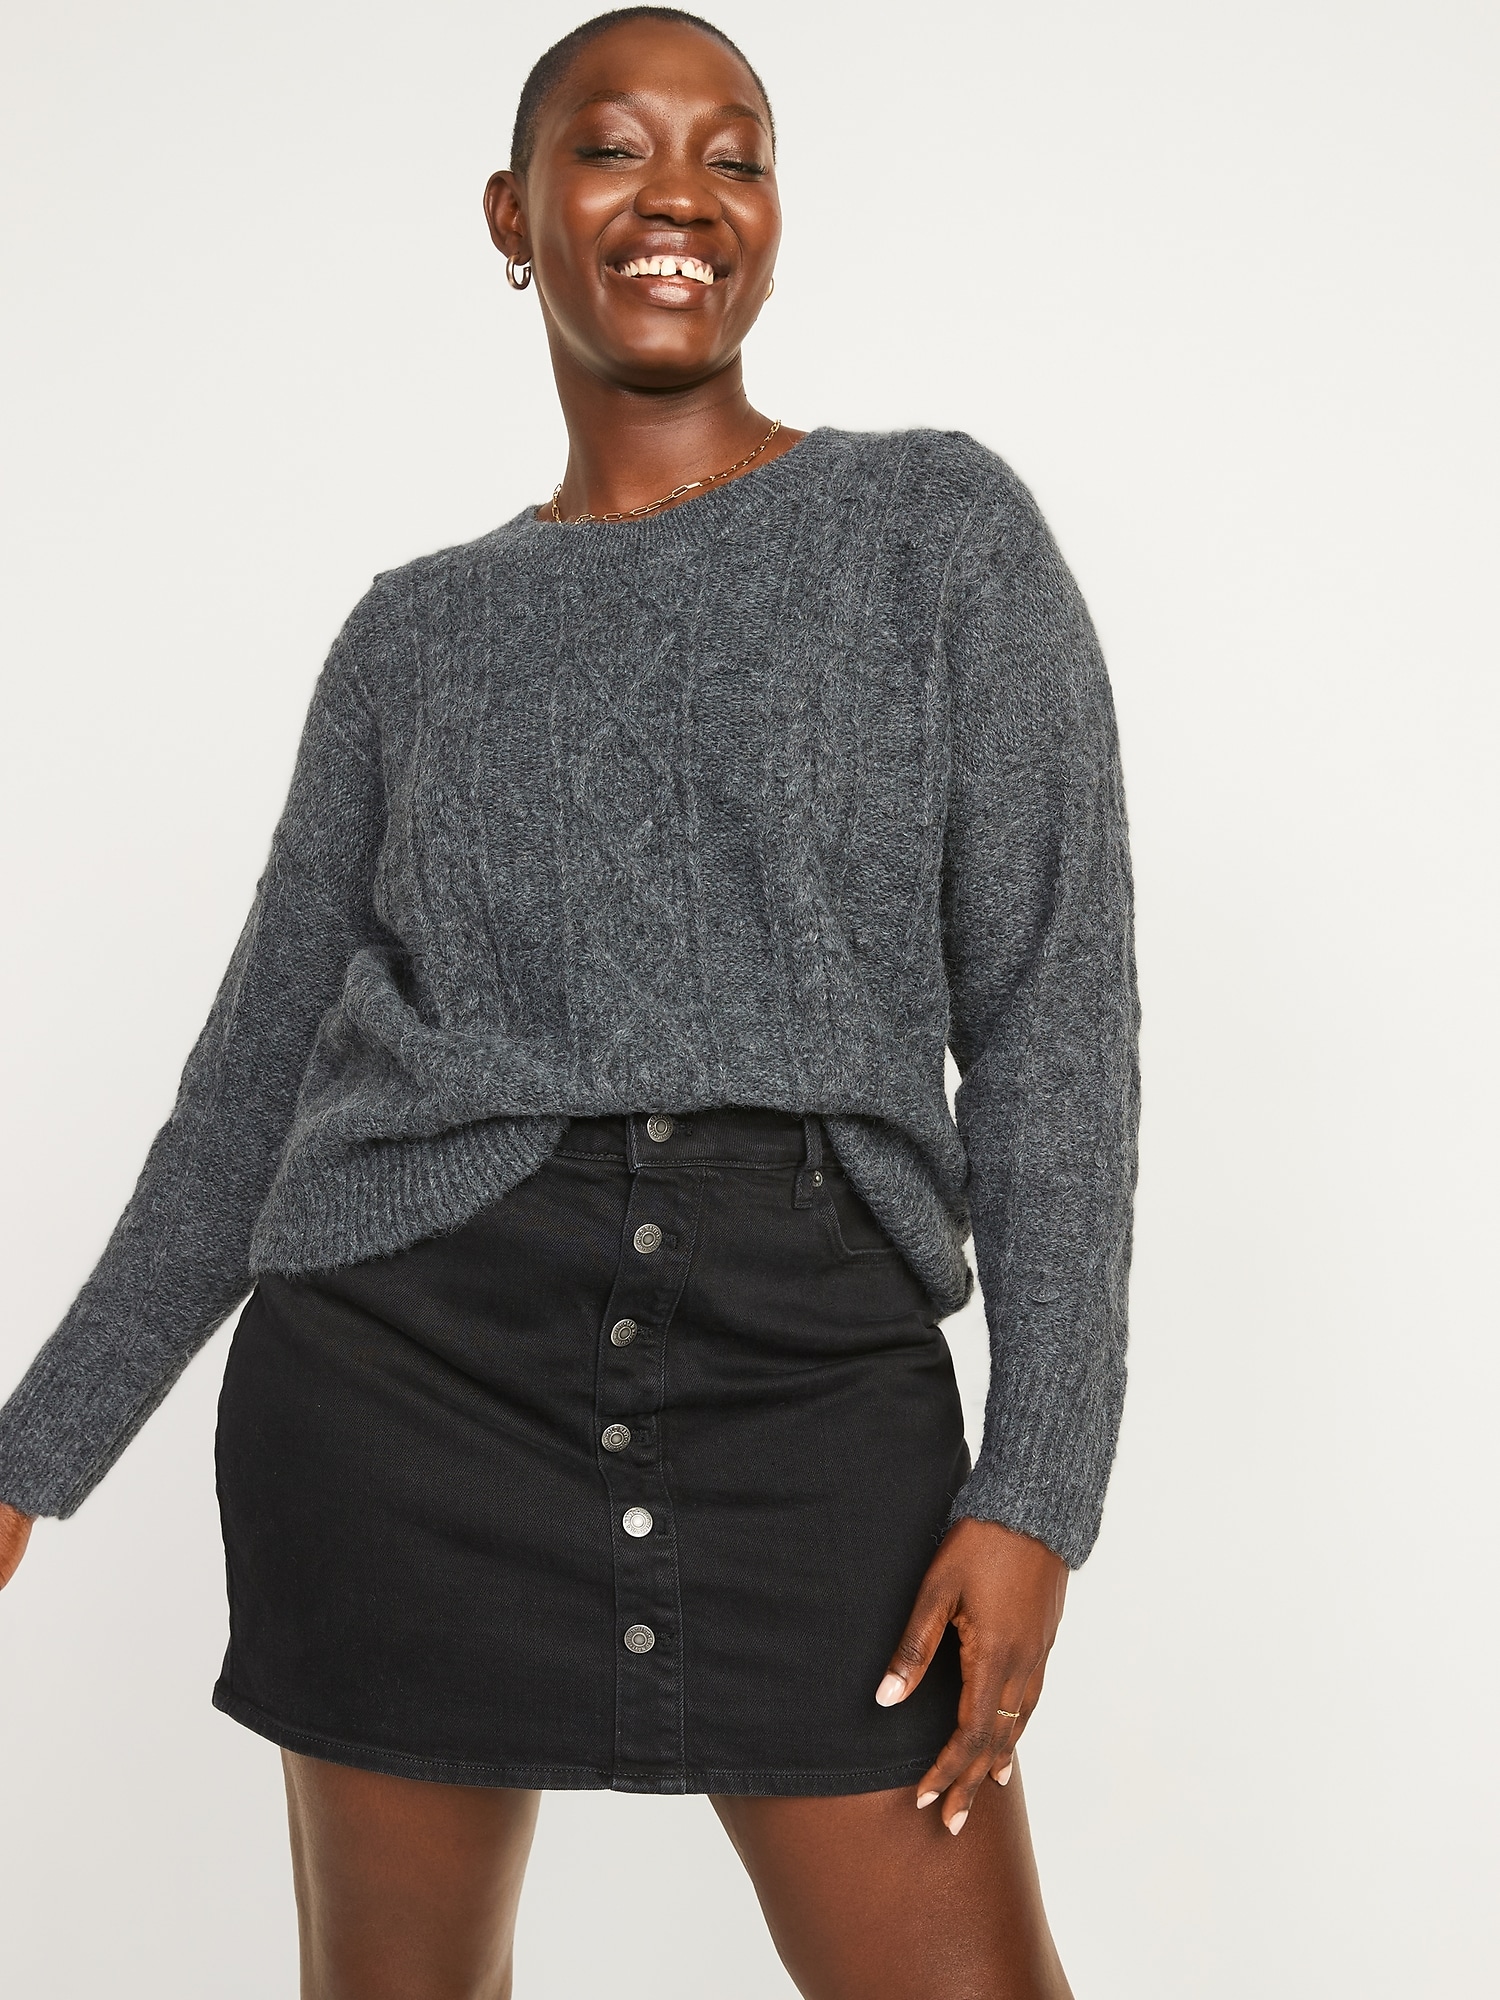 Textured Crew-Neck Sweater for Women | Old Navy